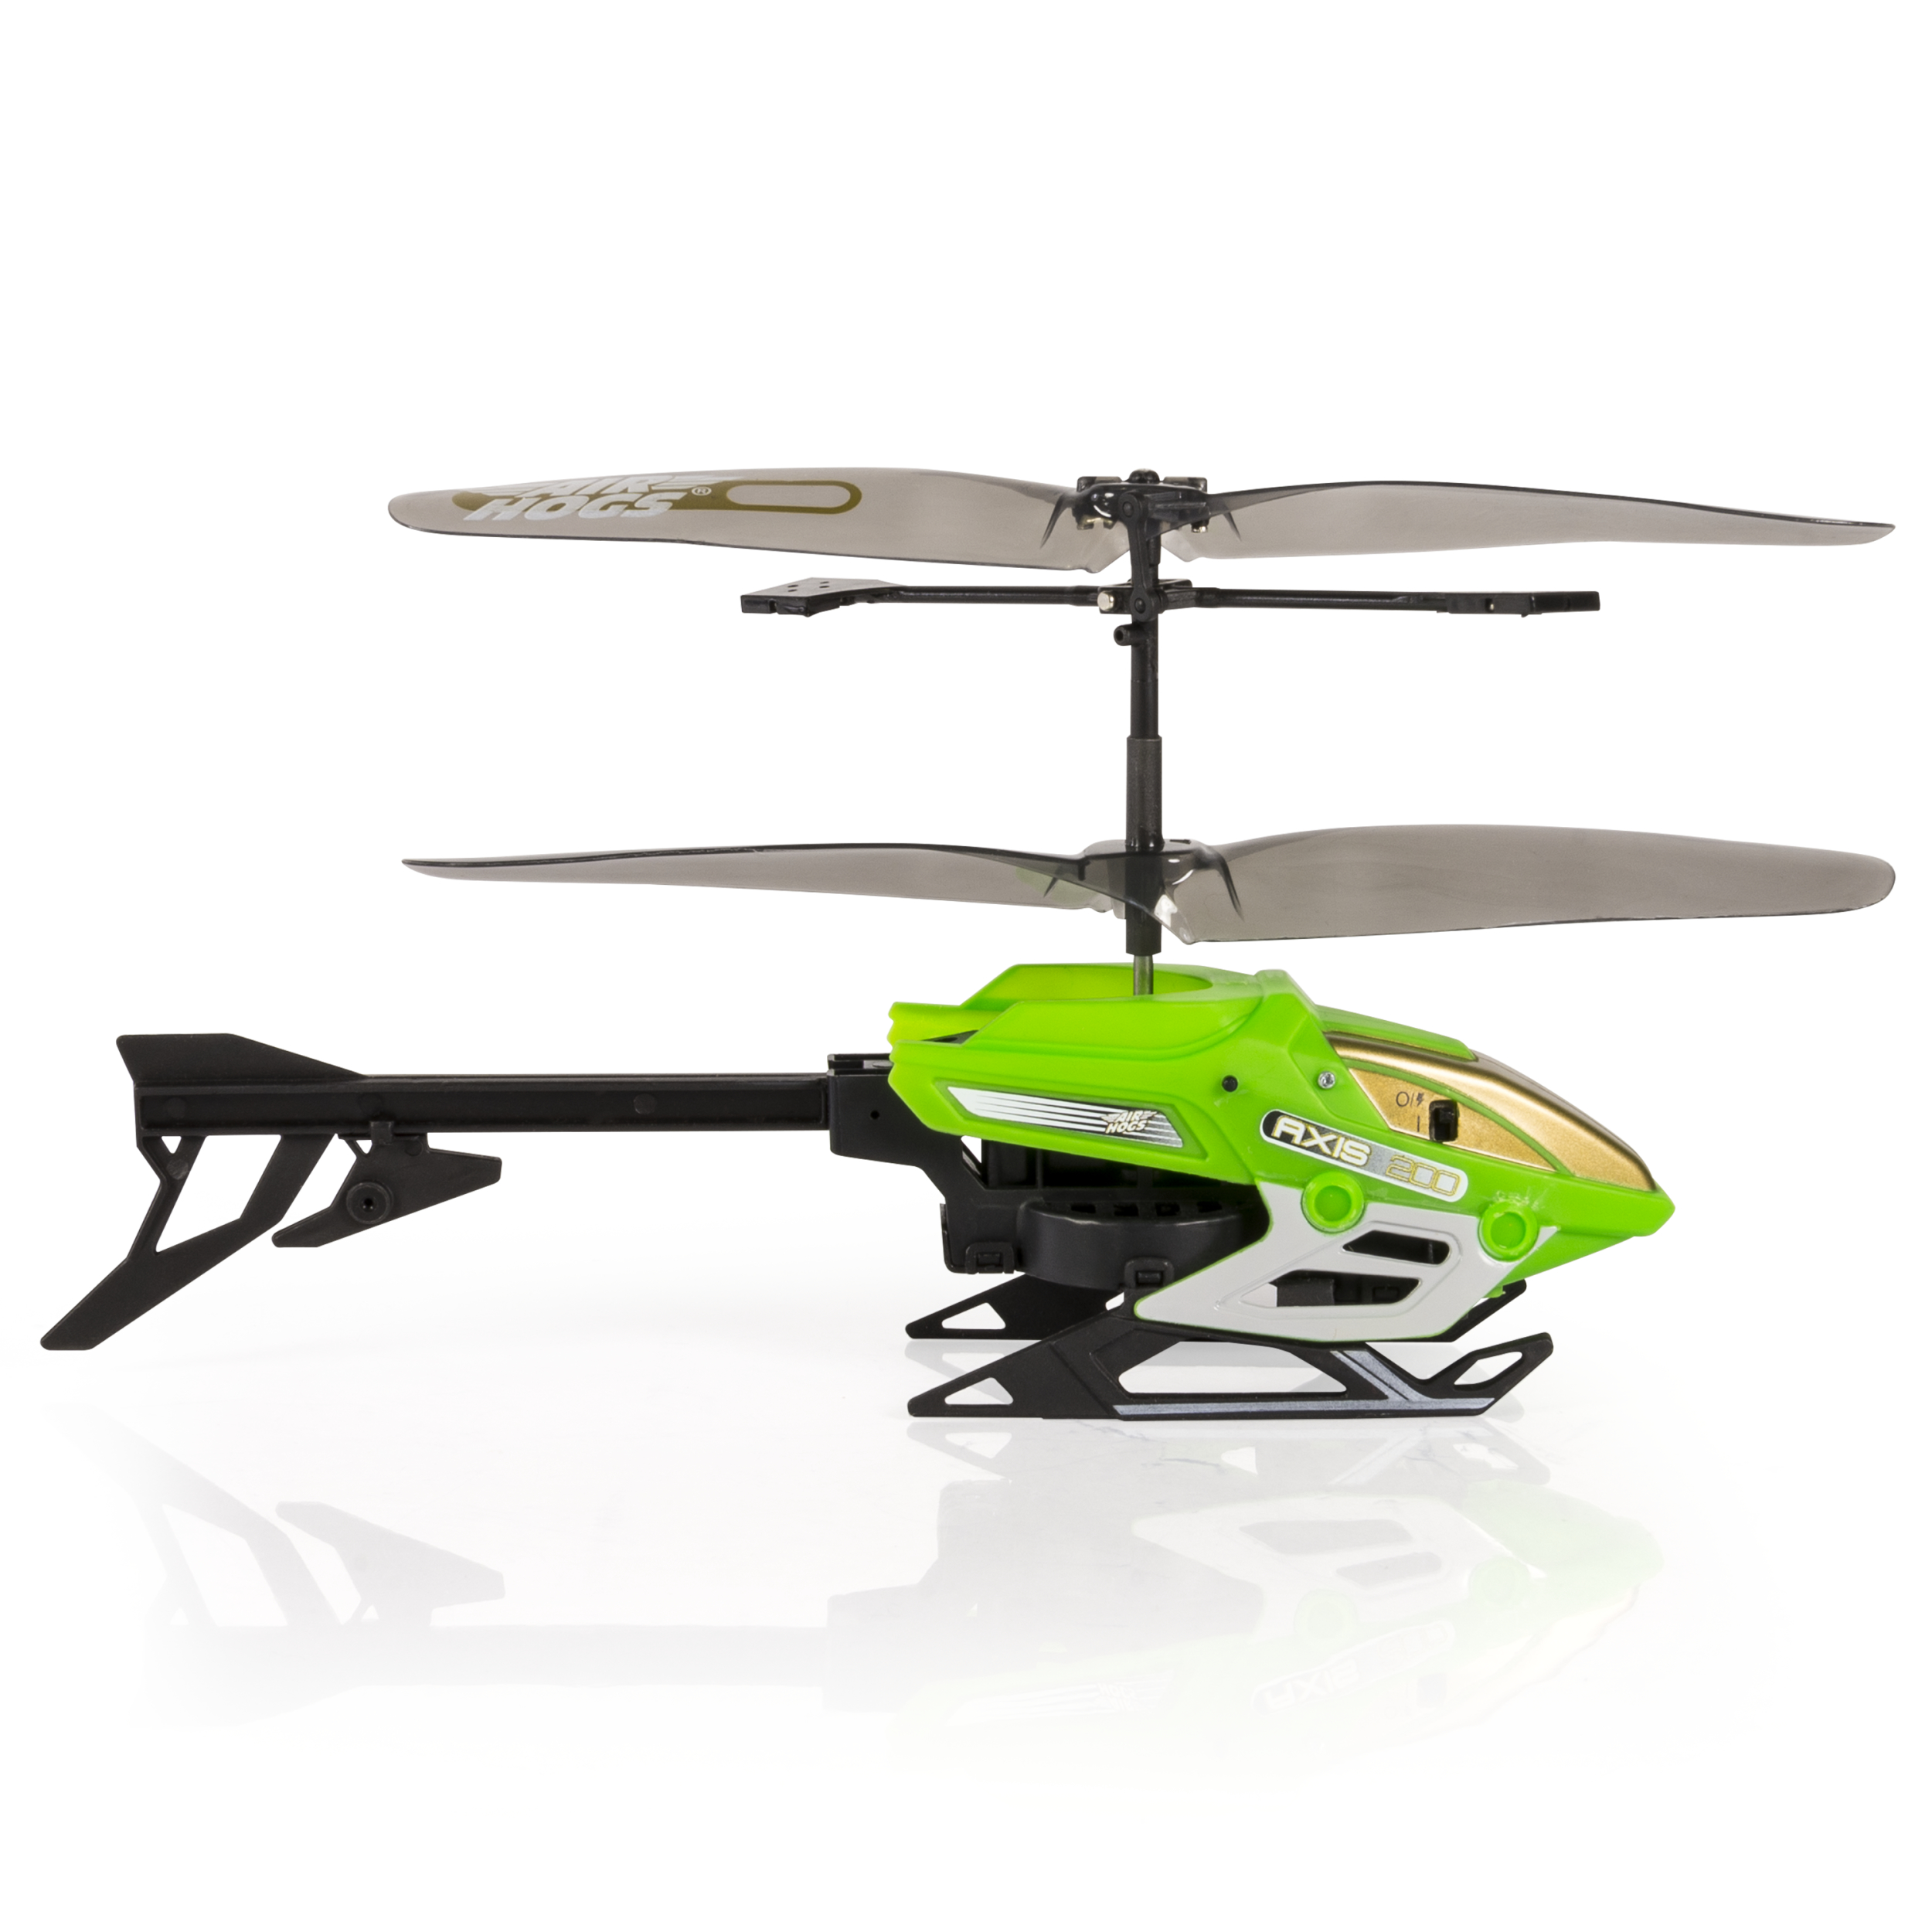 Air Hogs Axis 200 R/C Helicopter with Batteries, Green - image 3 of 6